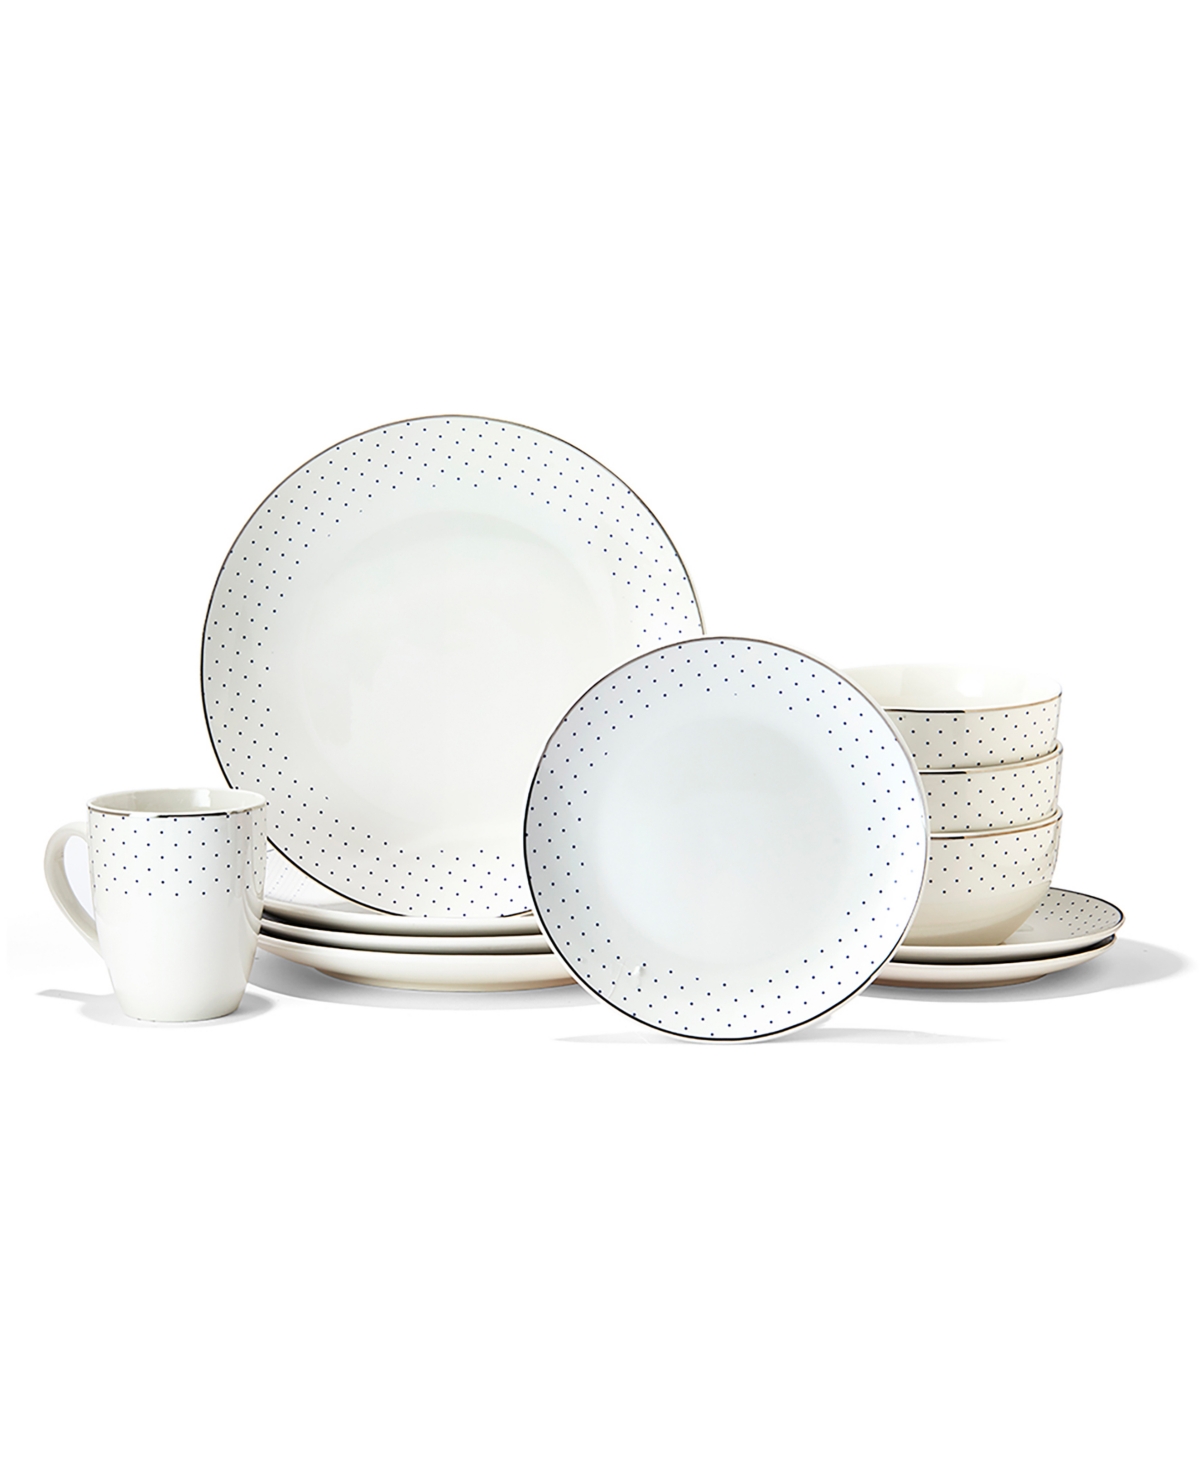 Jay Imports Isabelle 16 Piece Dinnerware Set In White